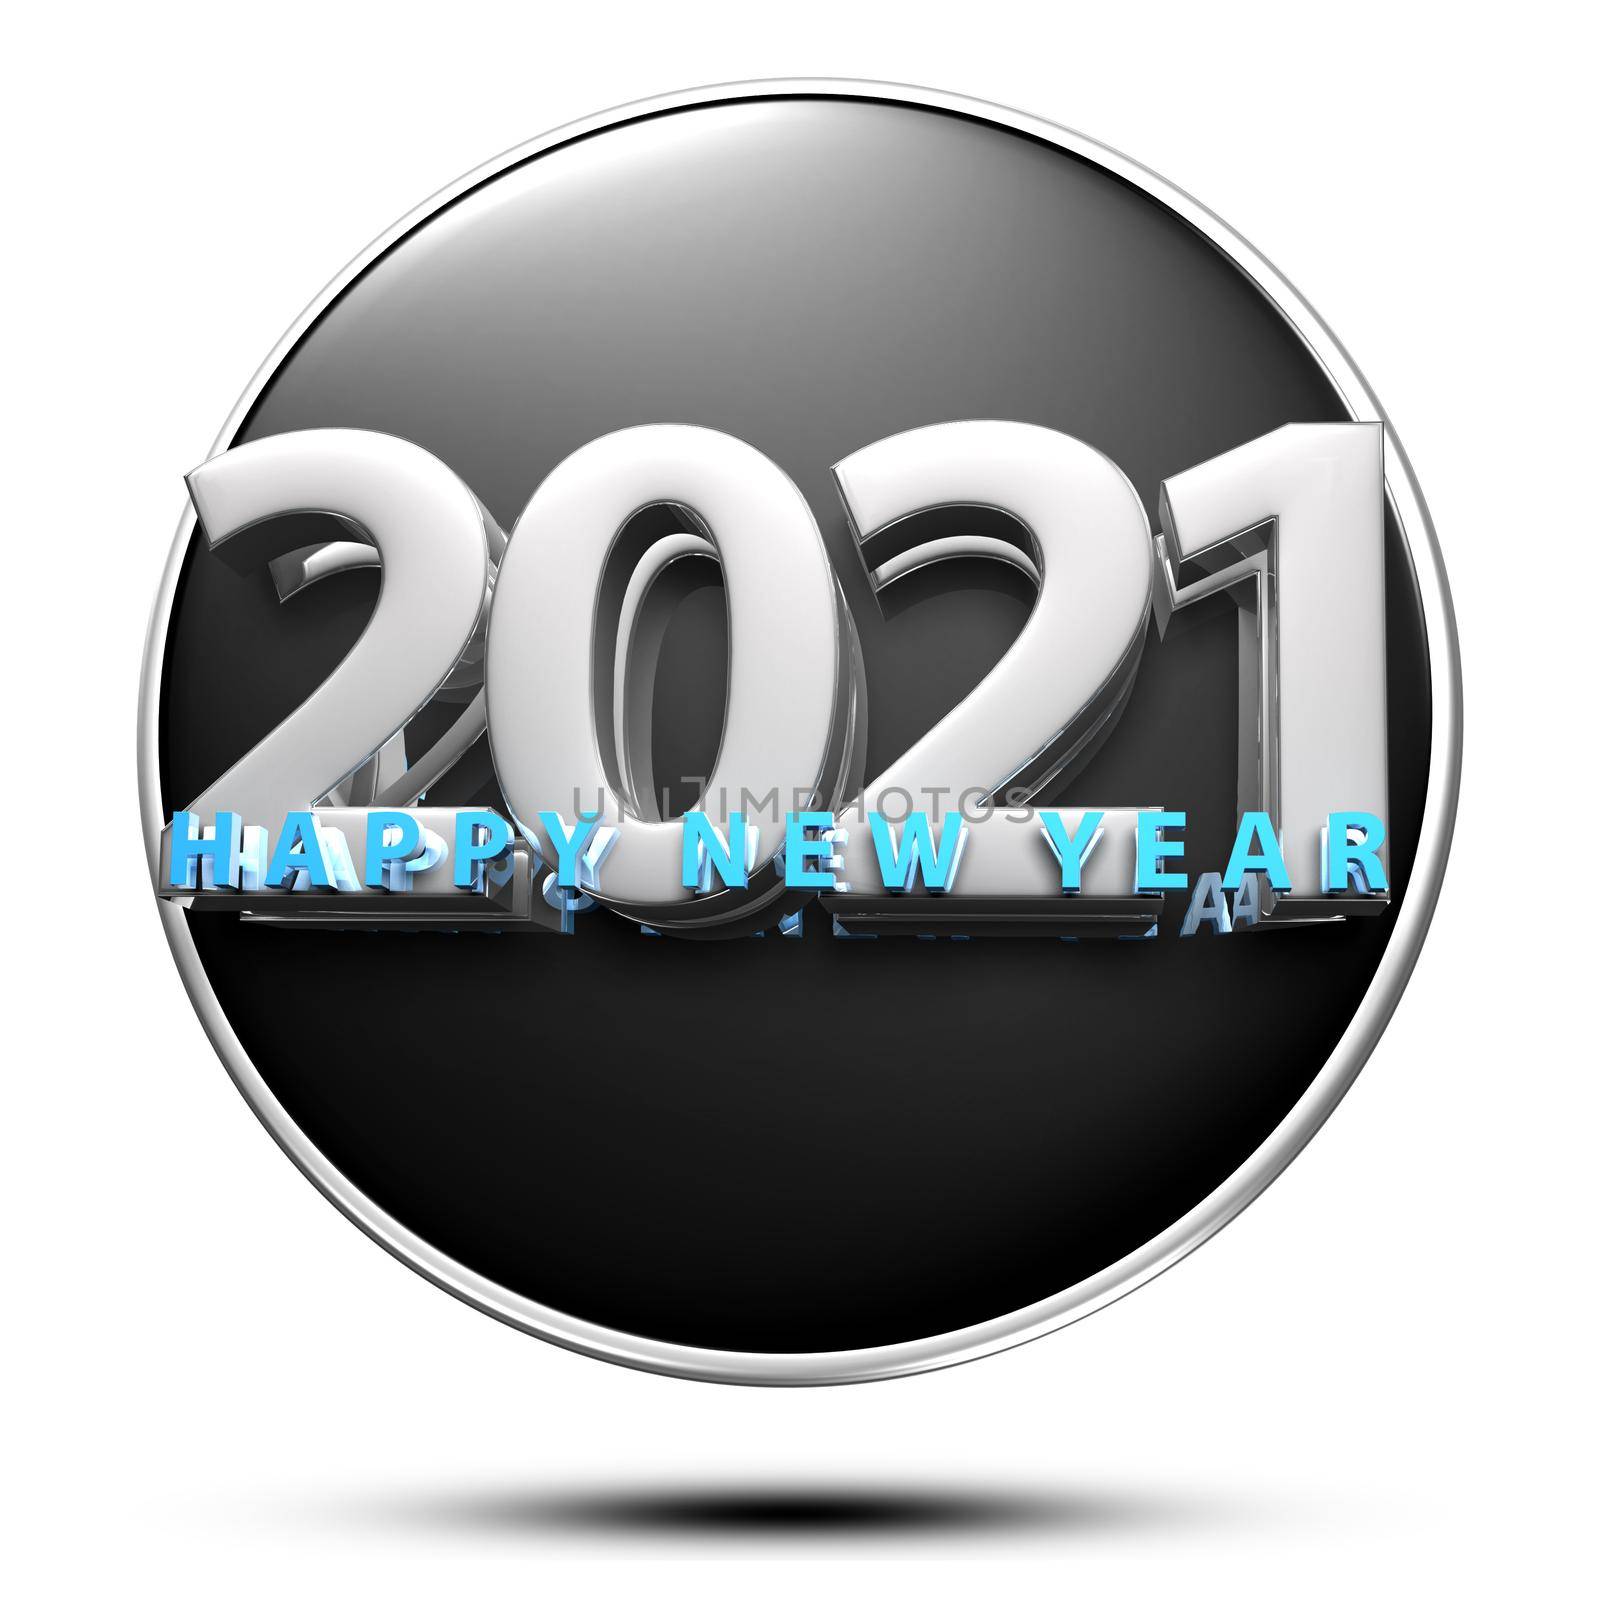 Happy new year 2021 isolated on white background illustration 3D rendering with Clipping Path.